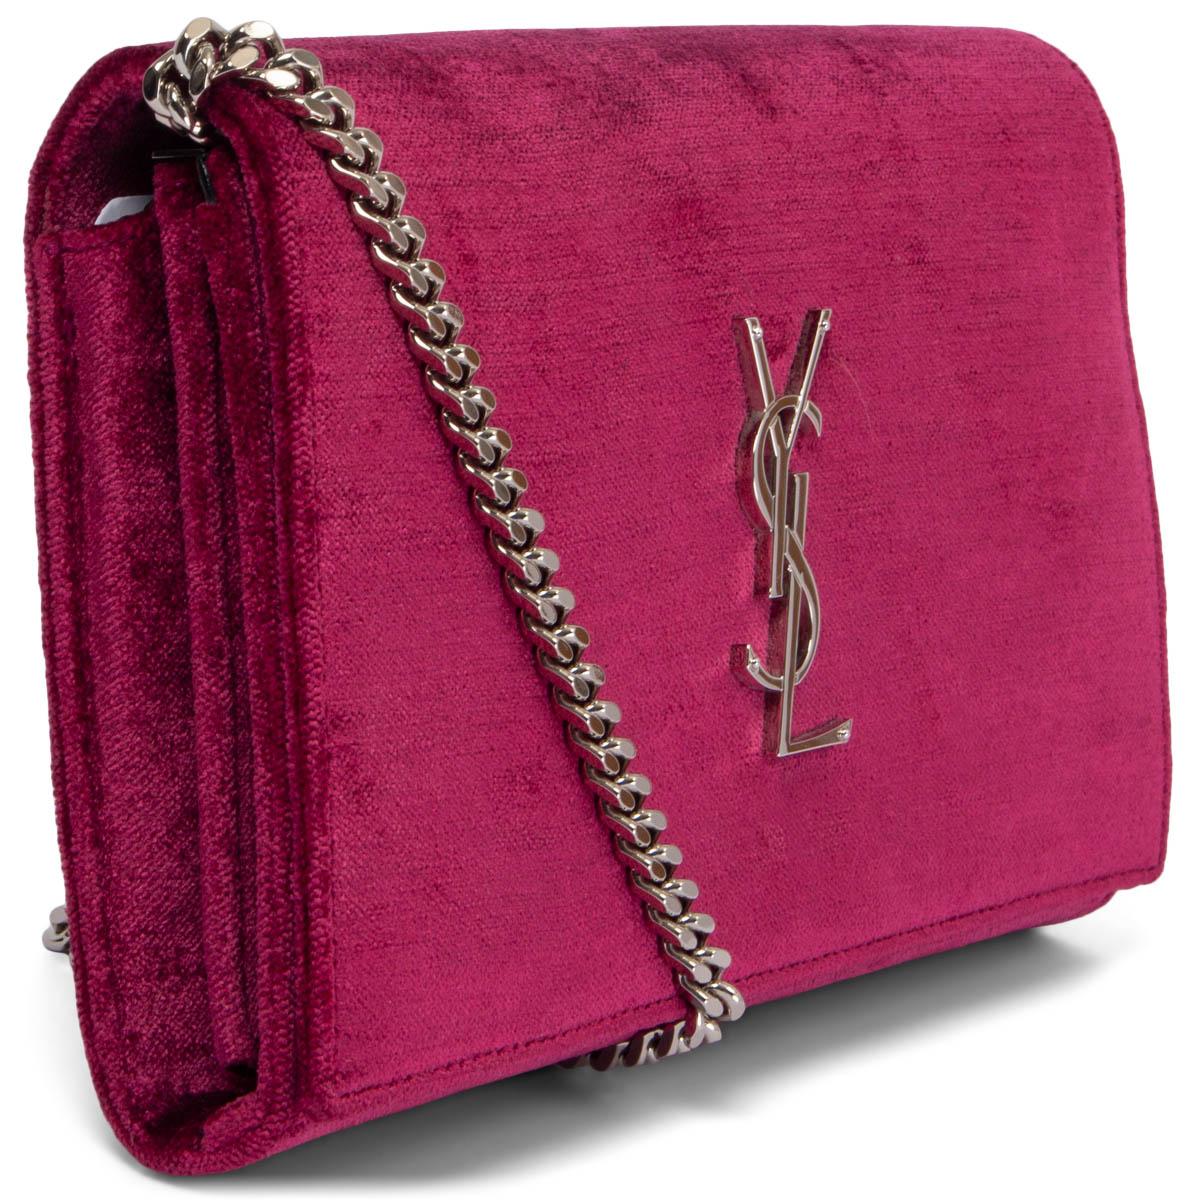 100% authentic Saint Laurent Kate WOC crossbody bag in velvet fuchsia with silver-tone metal YSL logo and chain shoulder strap. Opens with a push-button and is lined black leather with a zipper pocket in the middle and 20 credit card slots. Brand